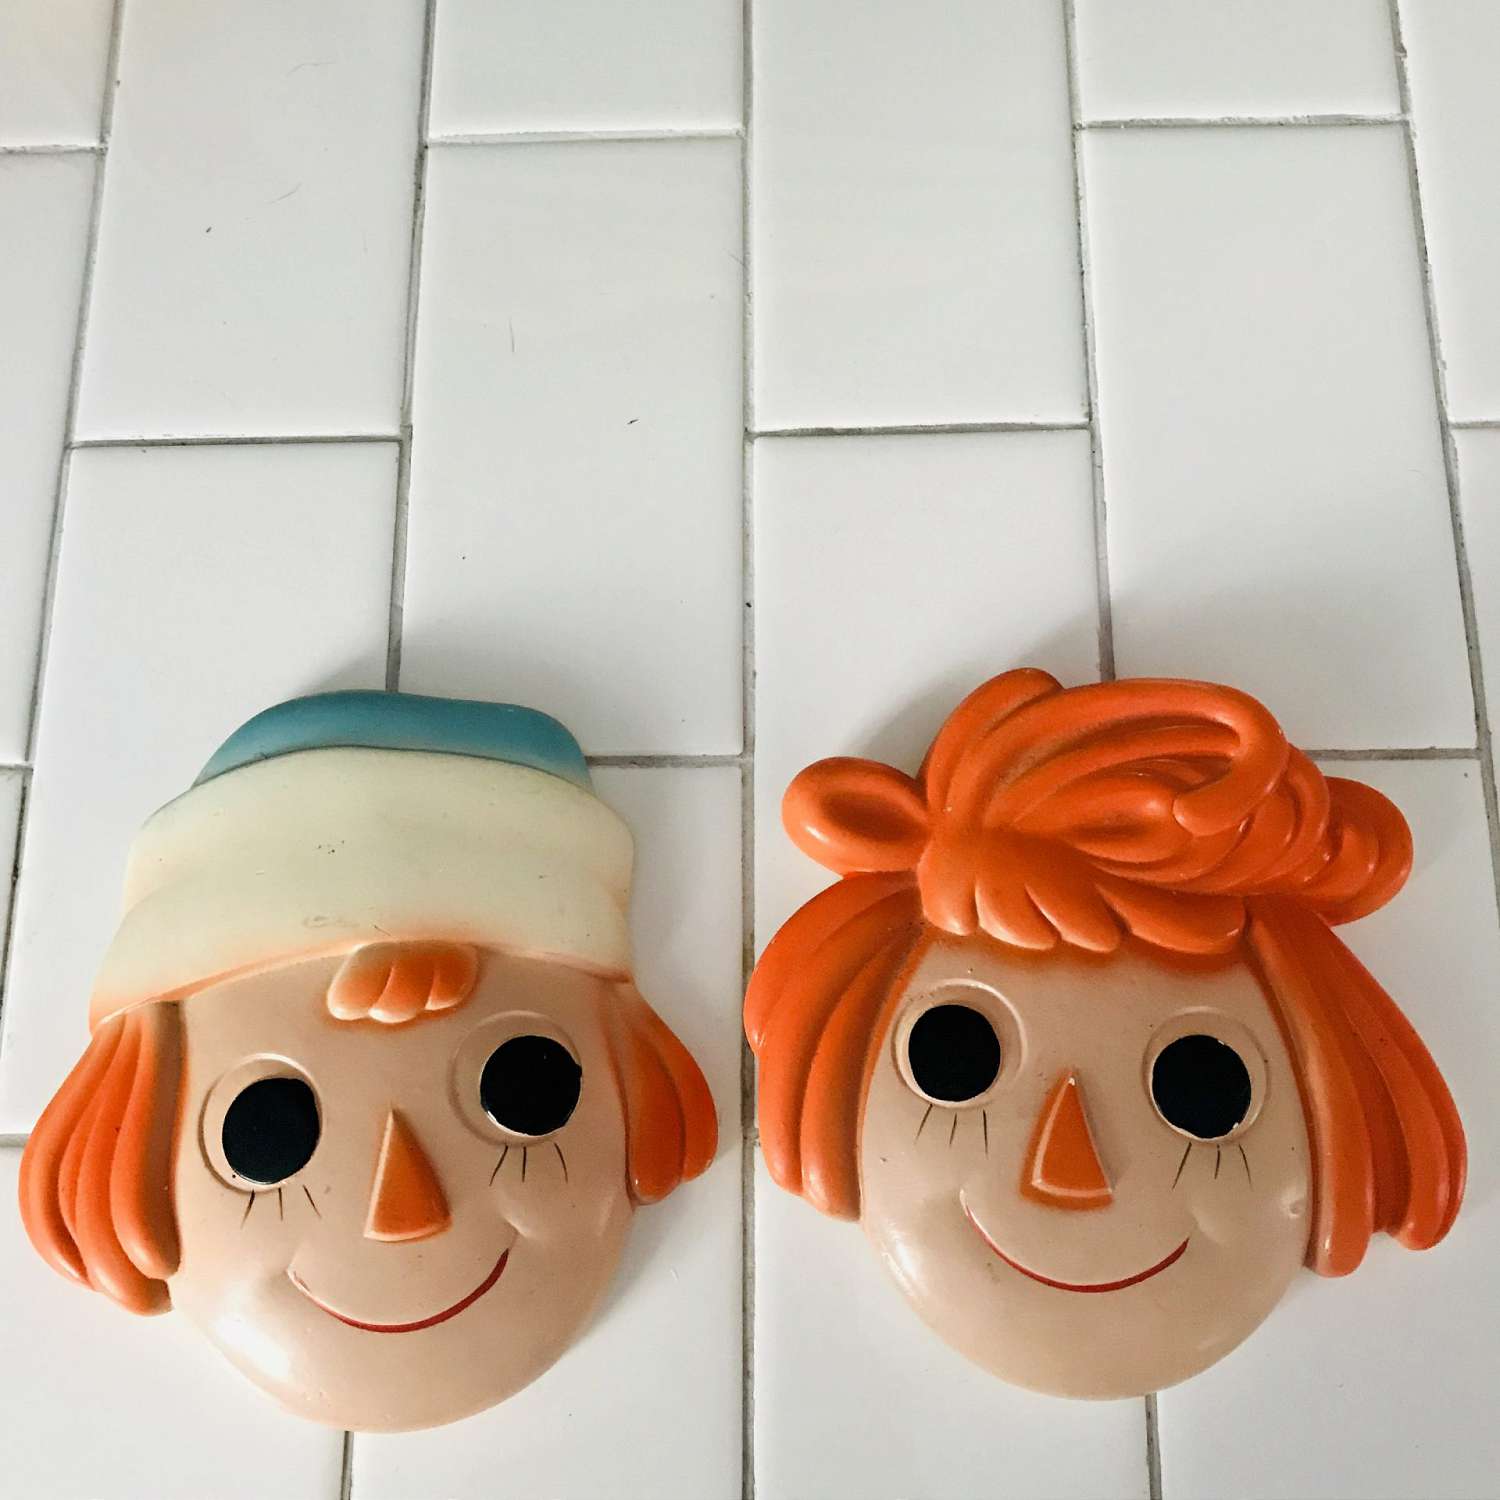 Vintage Raggedy Ann and Andy chalkware wall hanging figurines ...